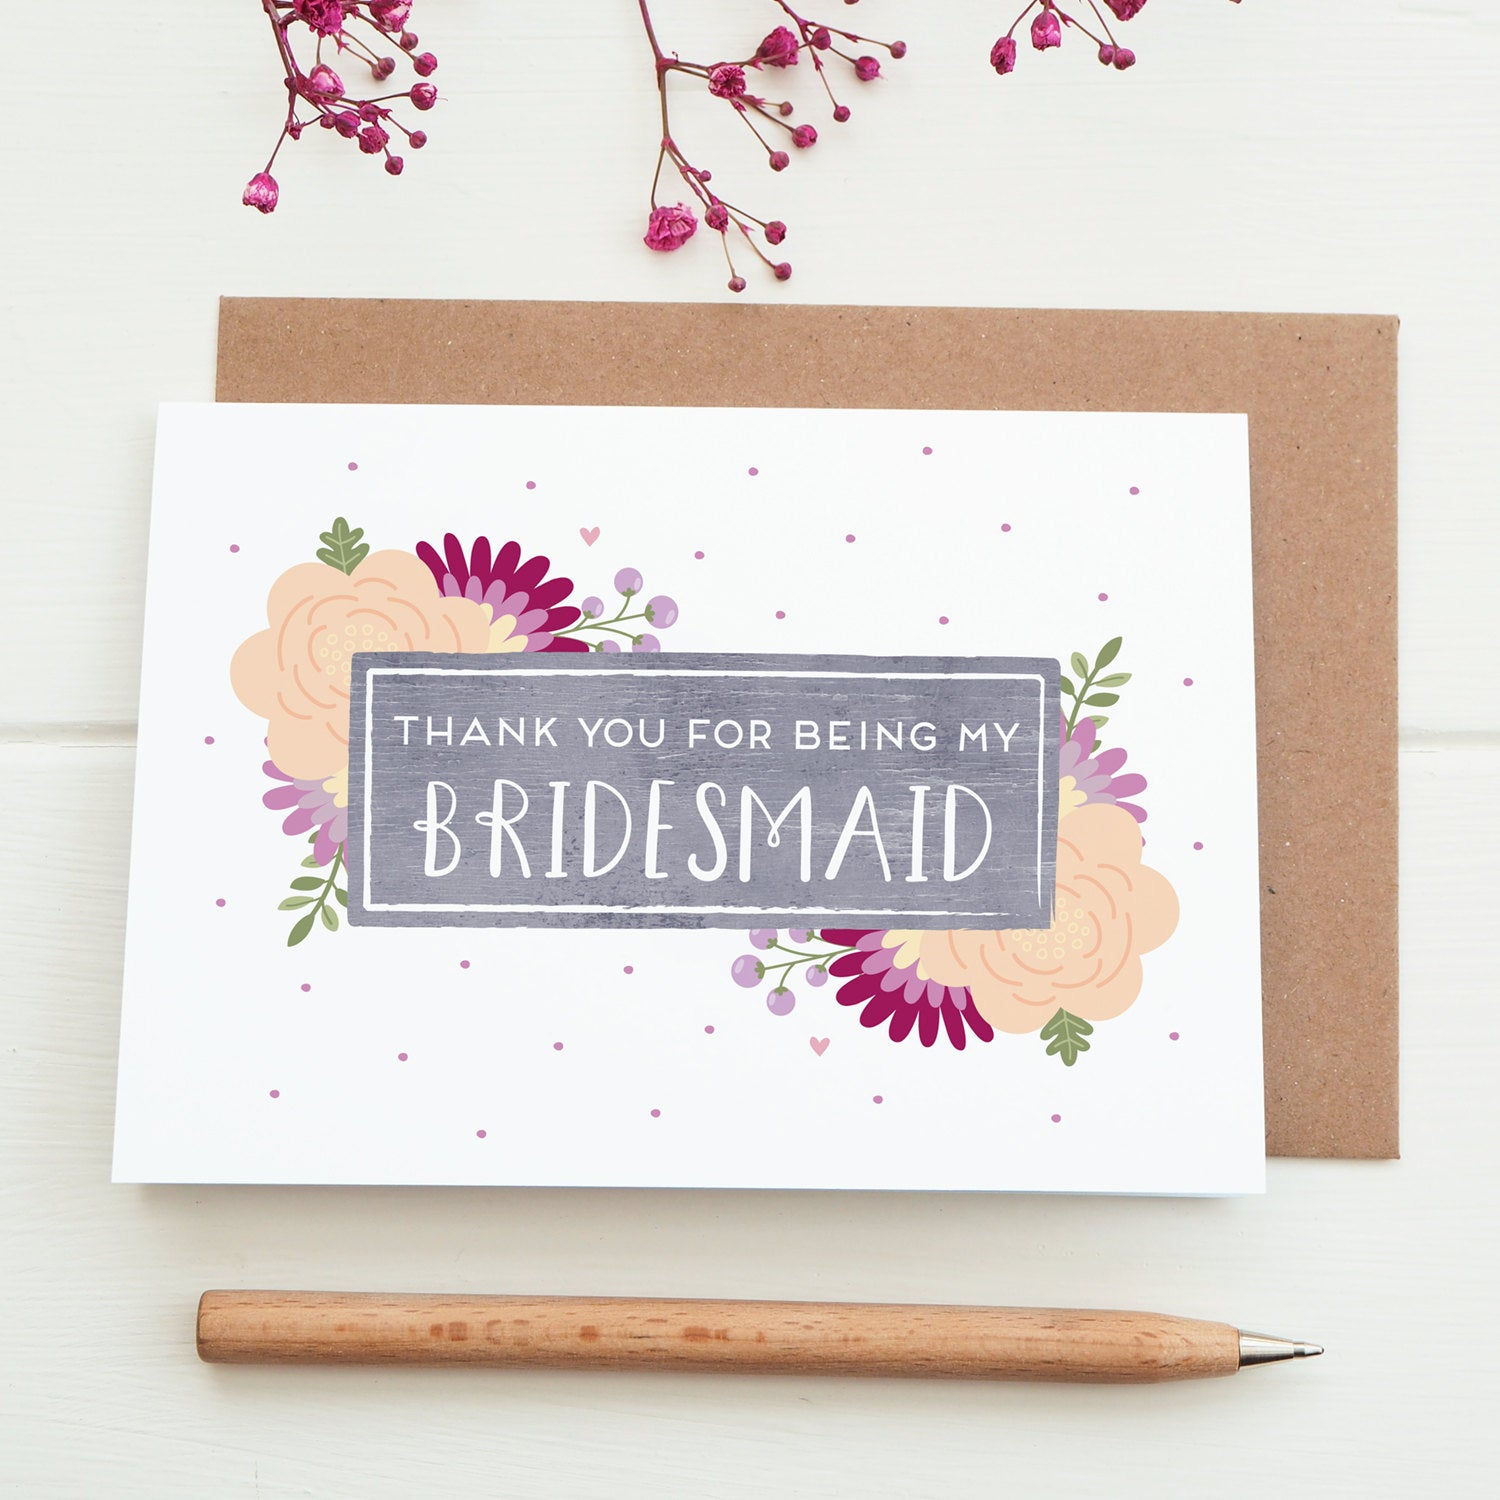 Thank you for being my Bridesmaid card in purple